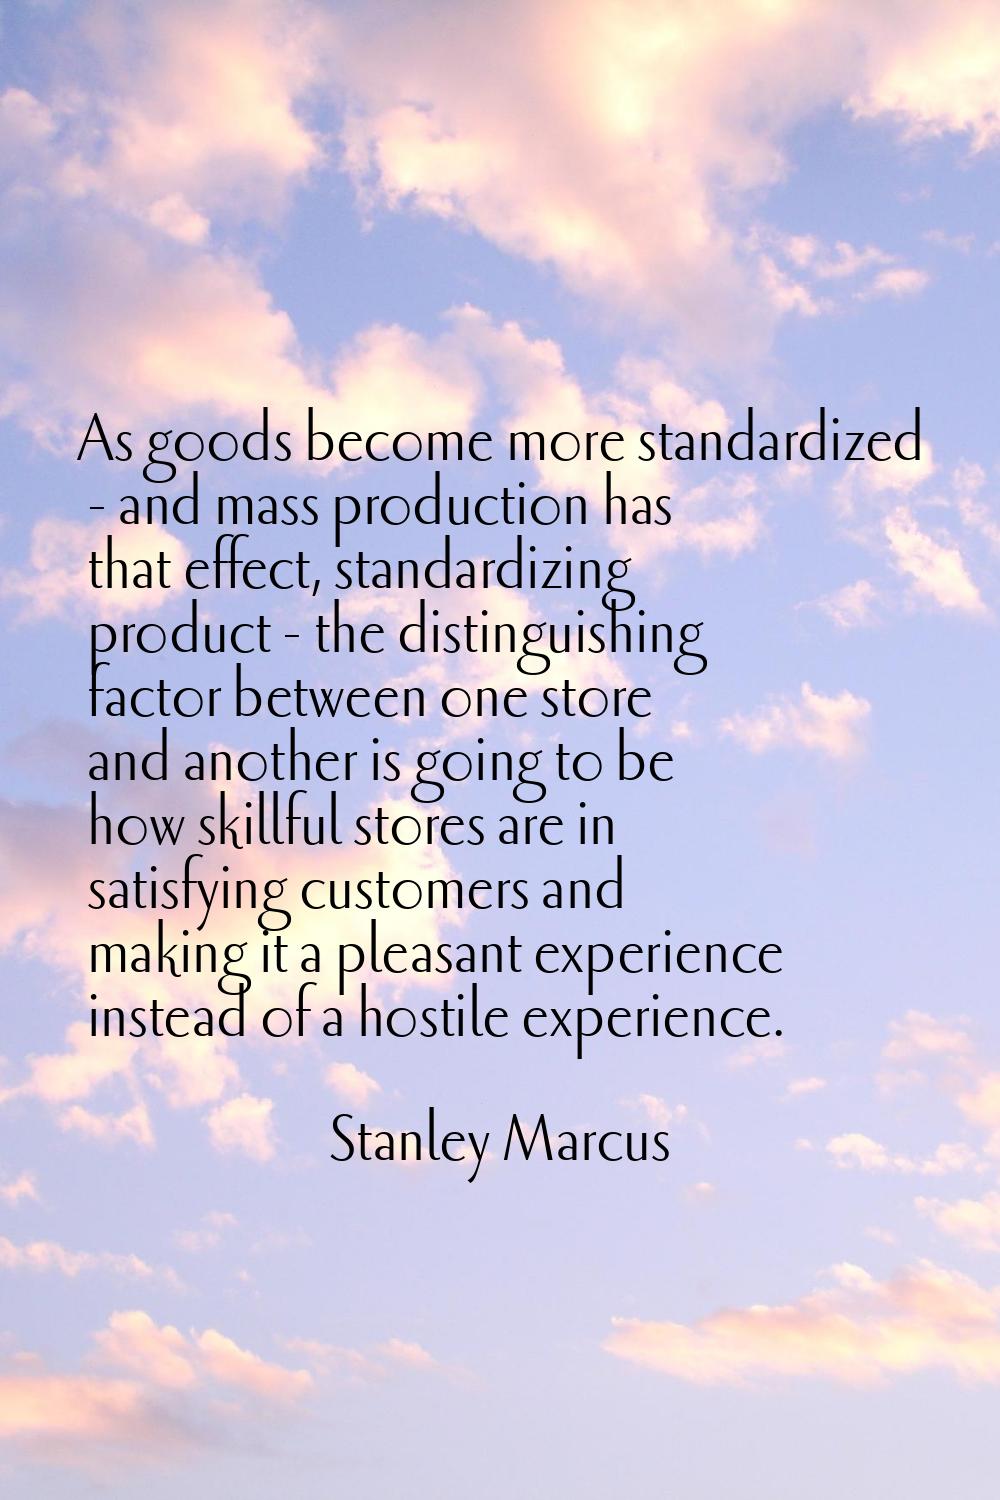 As goods become more standardized - and mass production has that effect, standardizing product - th